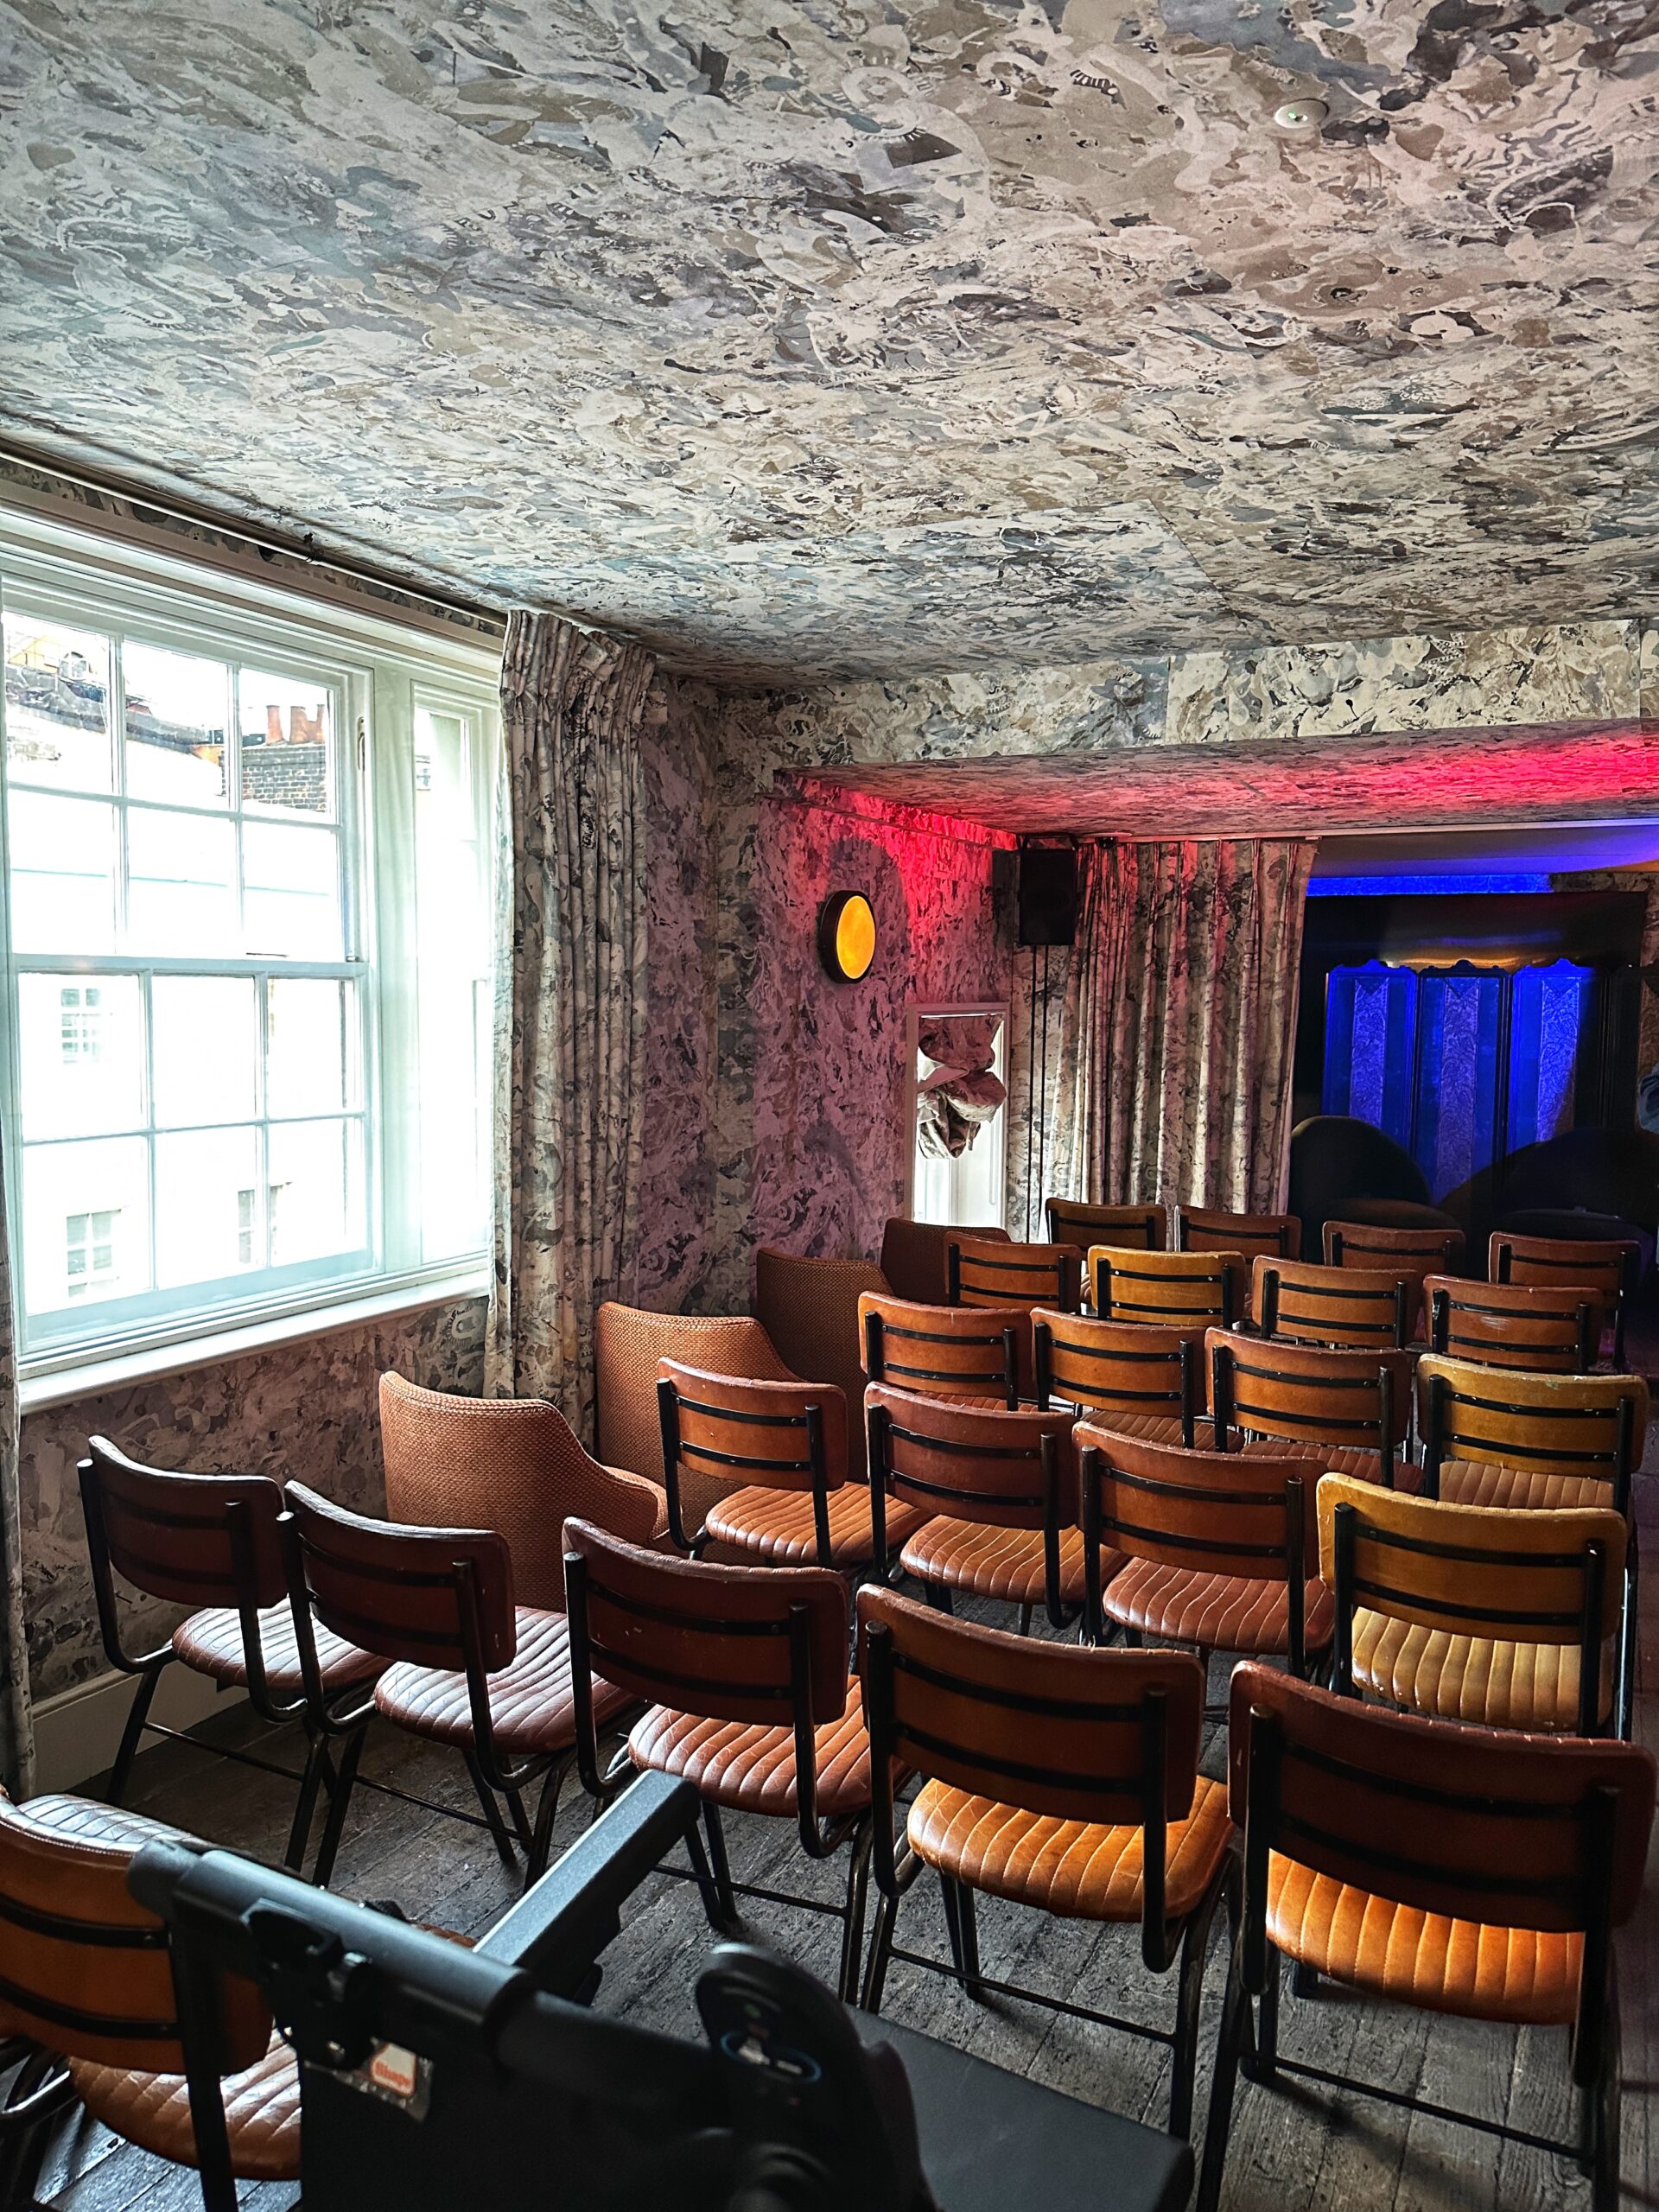 An event space in the original Soho House